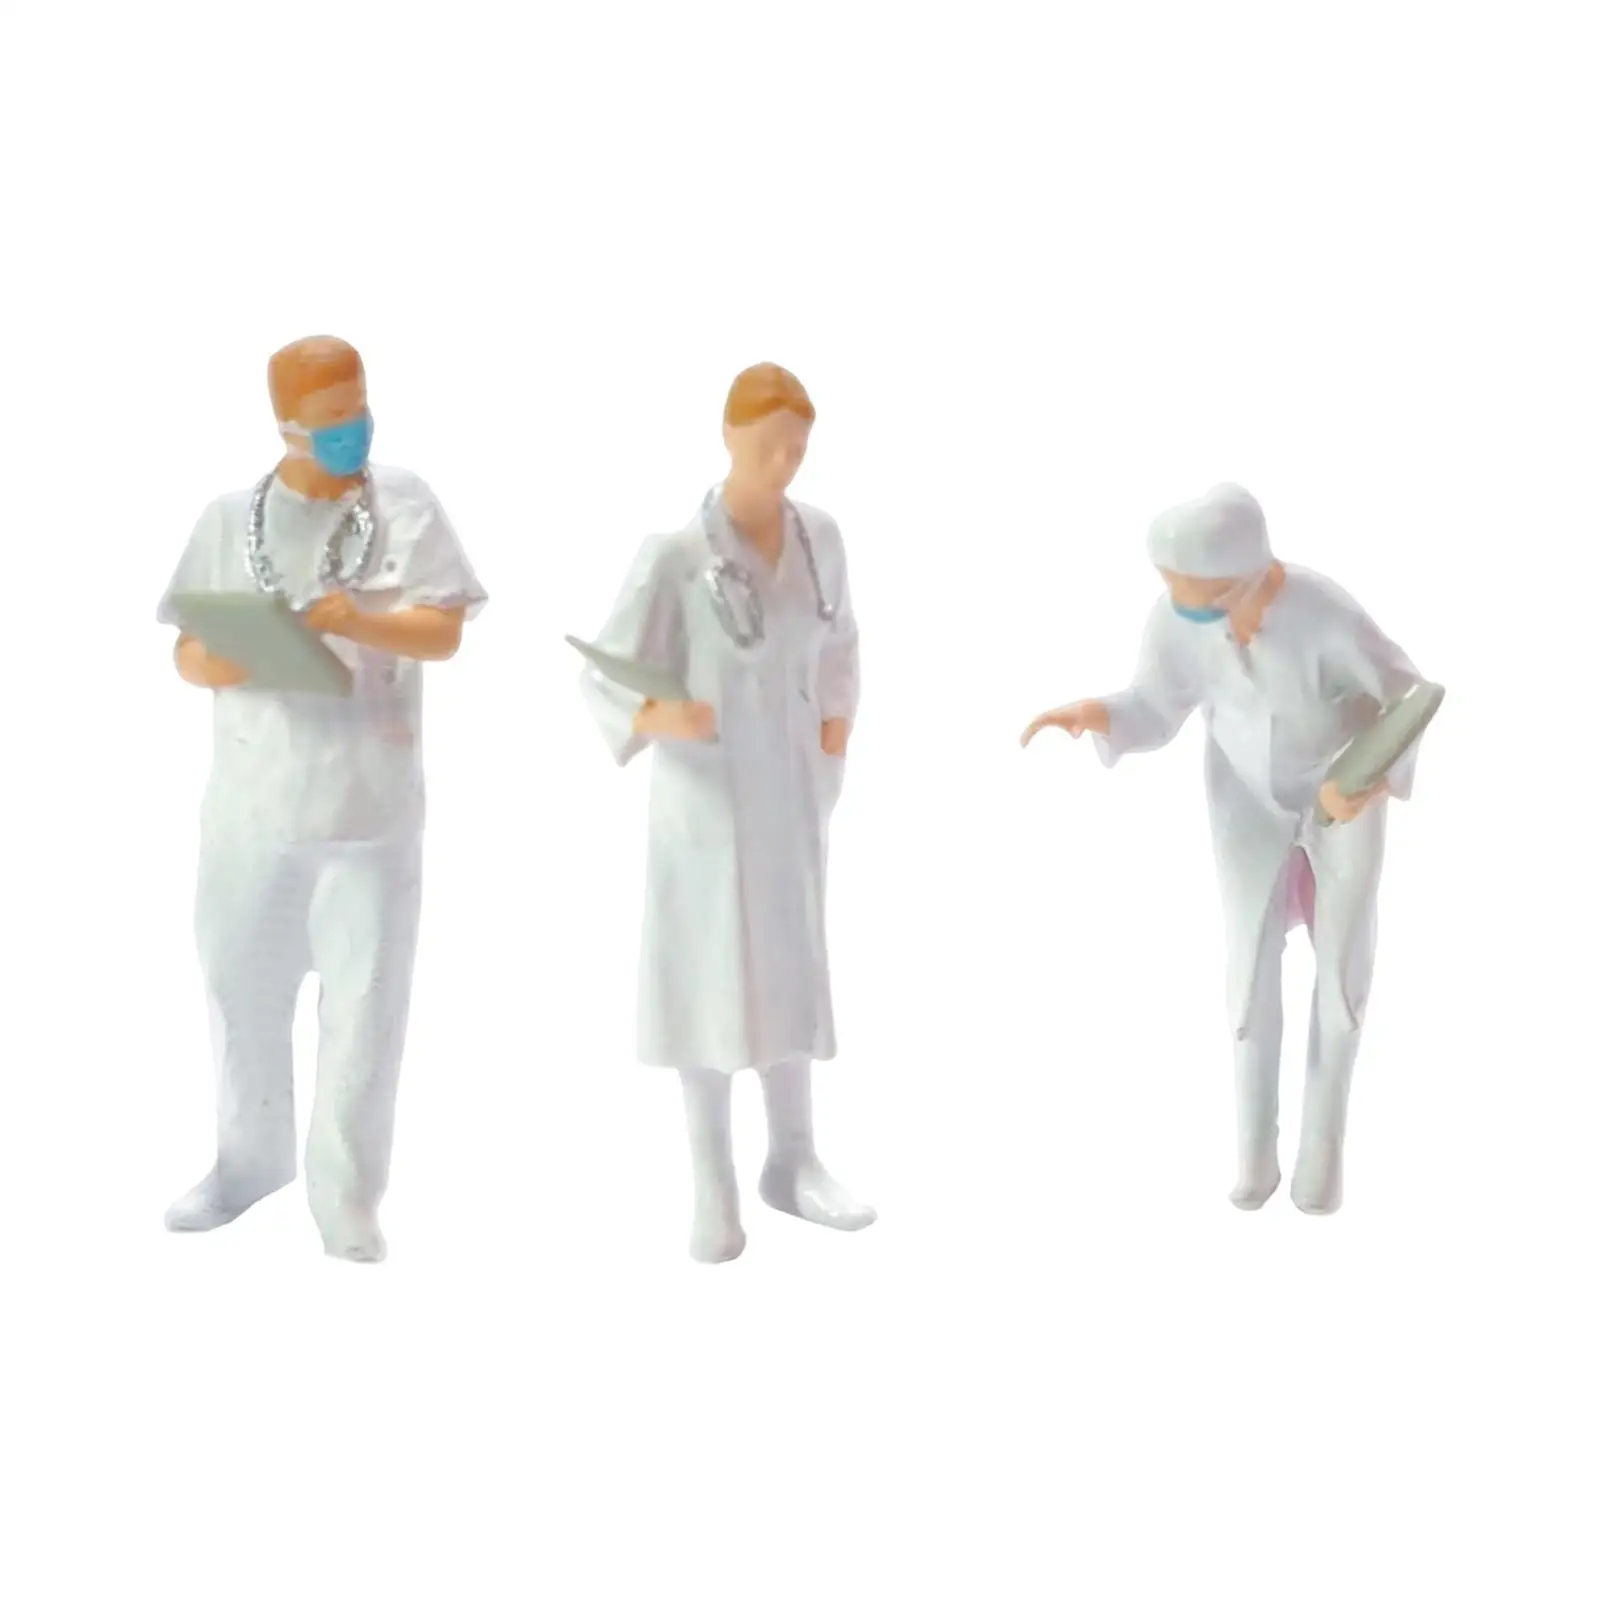 3Pcs 1:87 People Figurines Set People Models for Miniature Scenes Collection